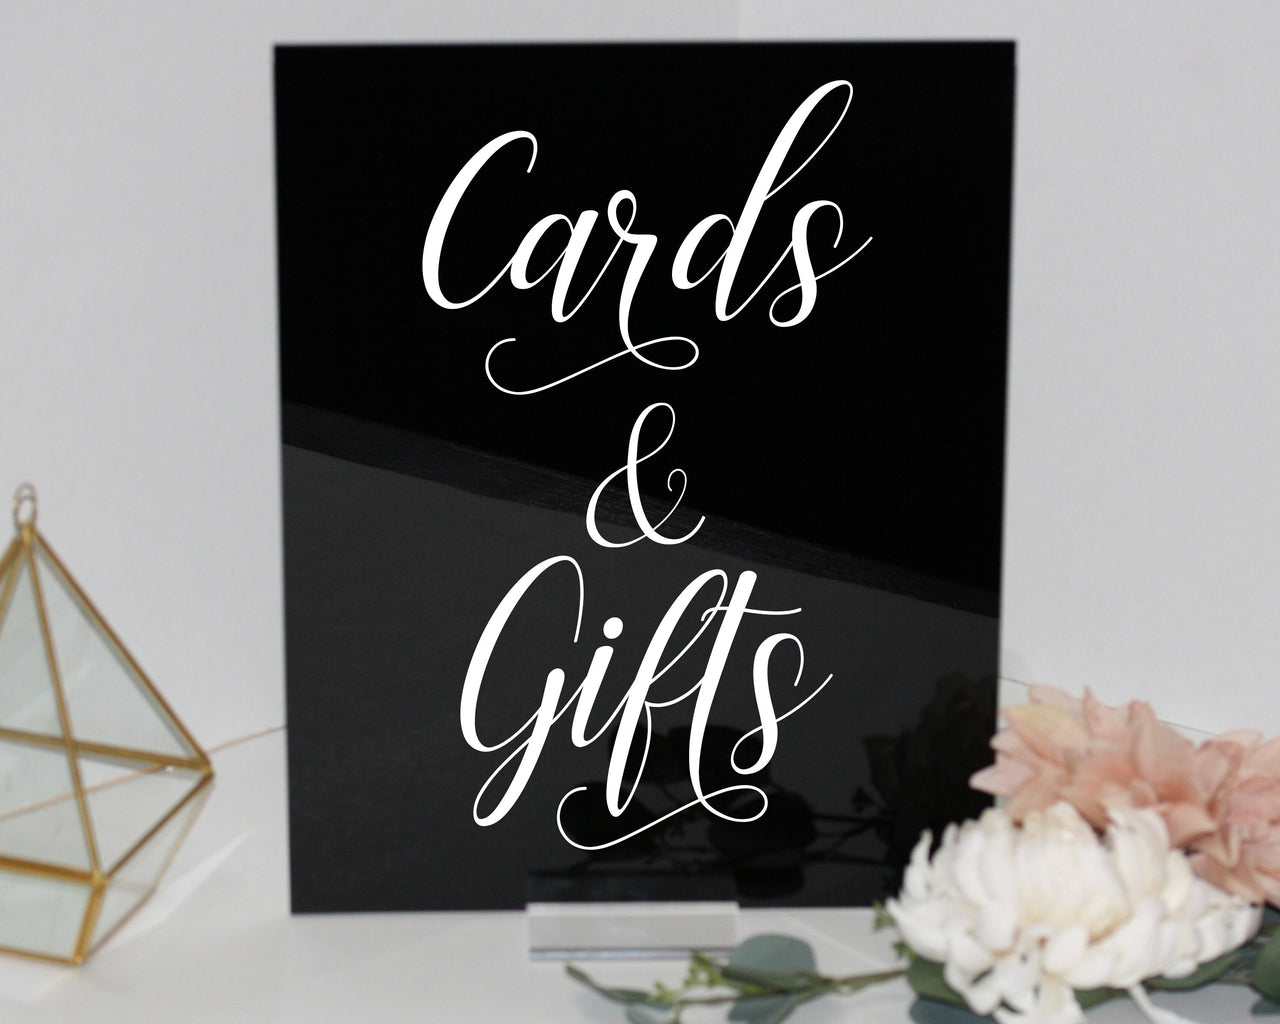 Cards and Gifts Sign, Acrylic Wedding Sign, Acrylic Sign Wedding, wedding reception signs, boho chic party decor, gift table sign - RS3AM